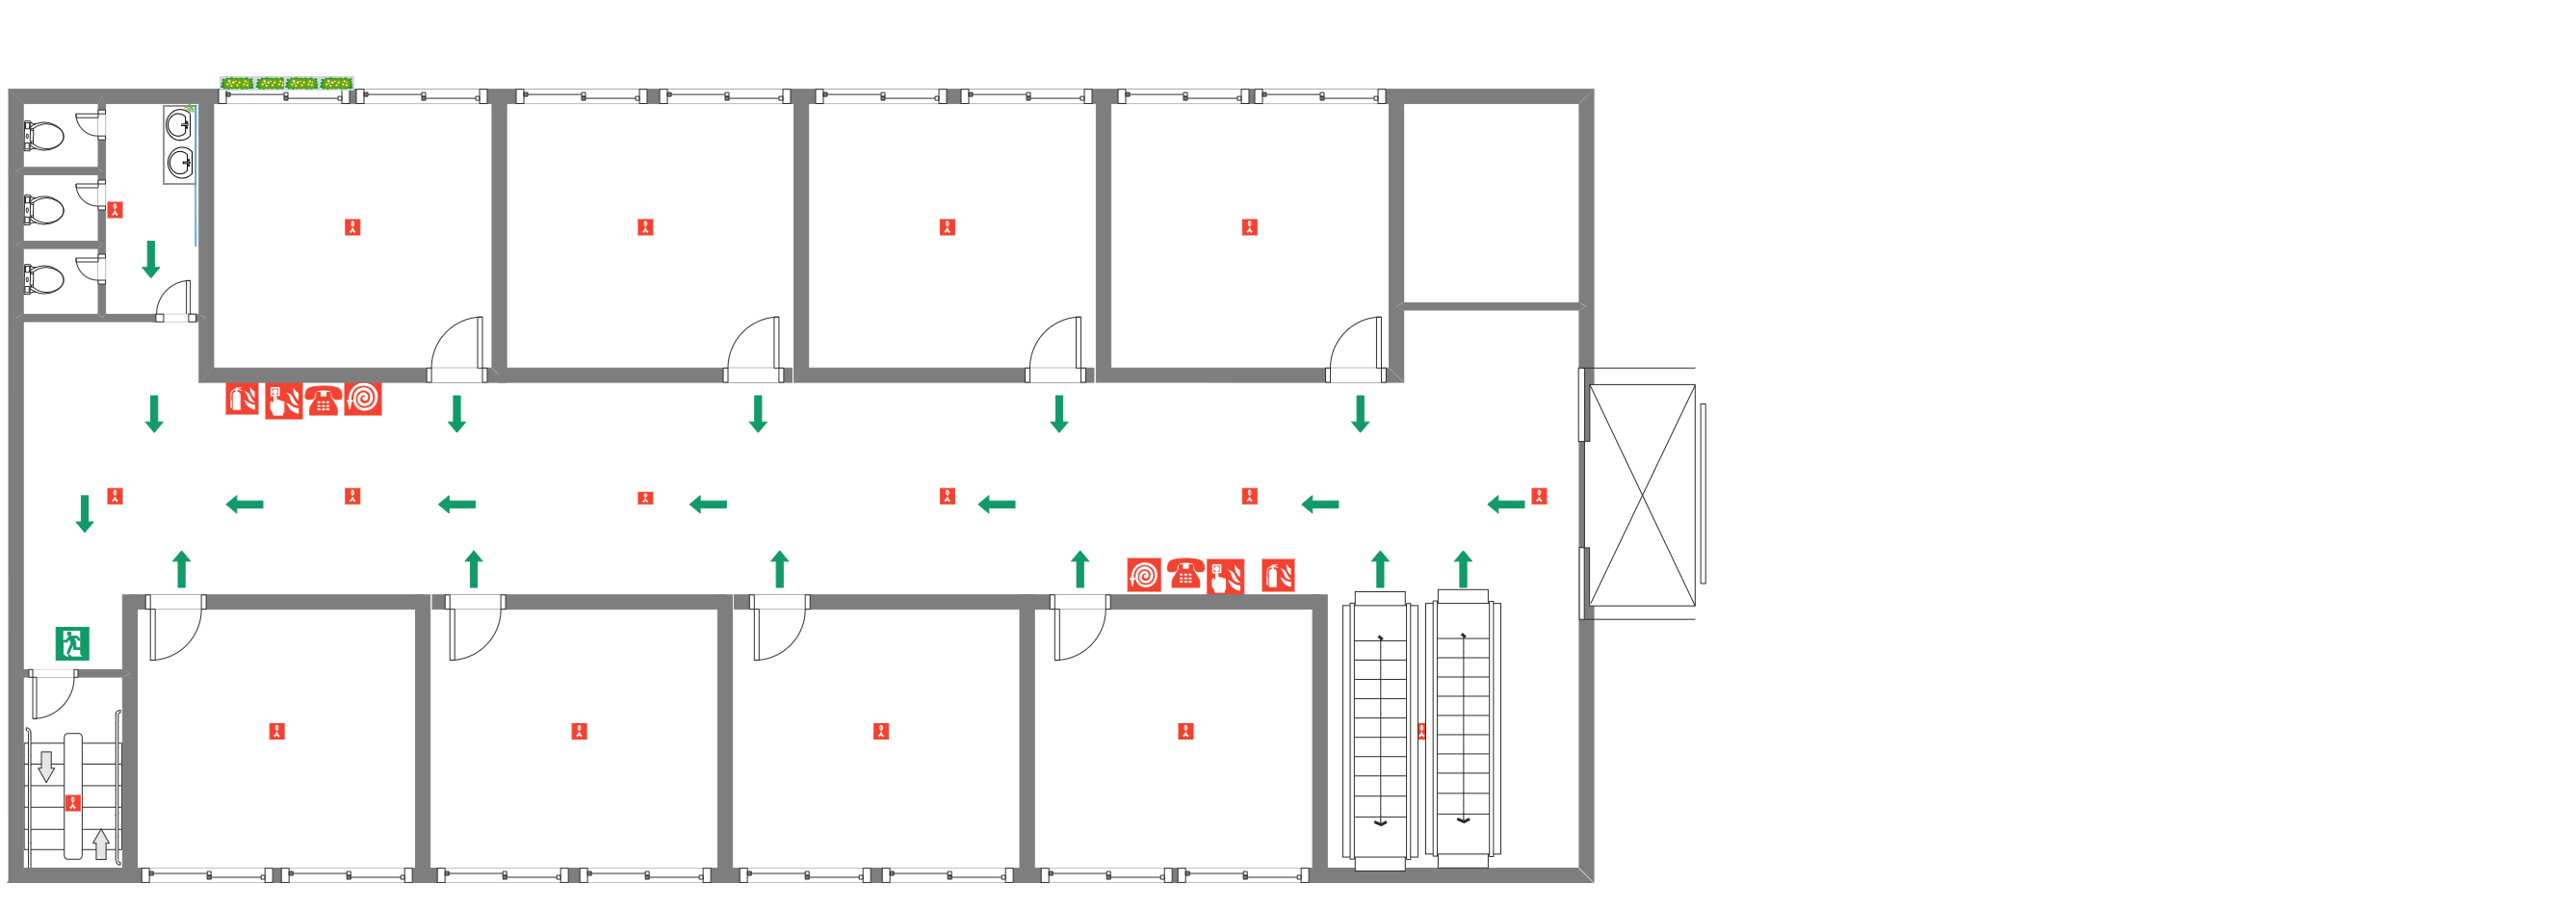 Double floor safety plan shows different entrances in a double floor apartment. Telling employees or members of an apartment to watch their step is not enough to eliminate slip, trip, and fall injuries in production areas. Like other safety hazards, slip,